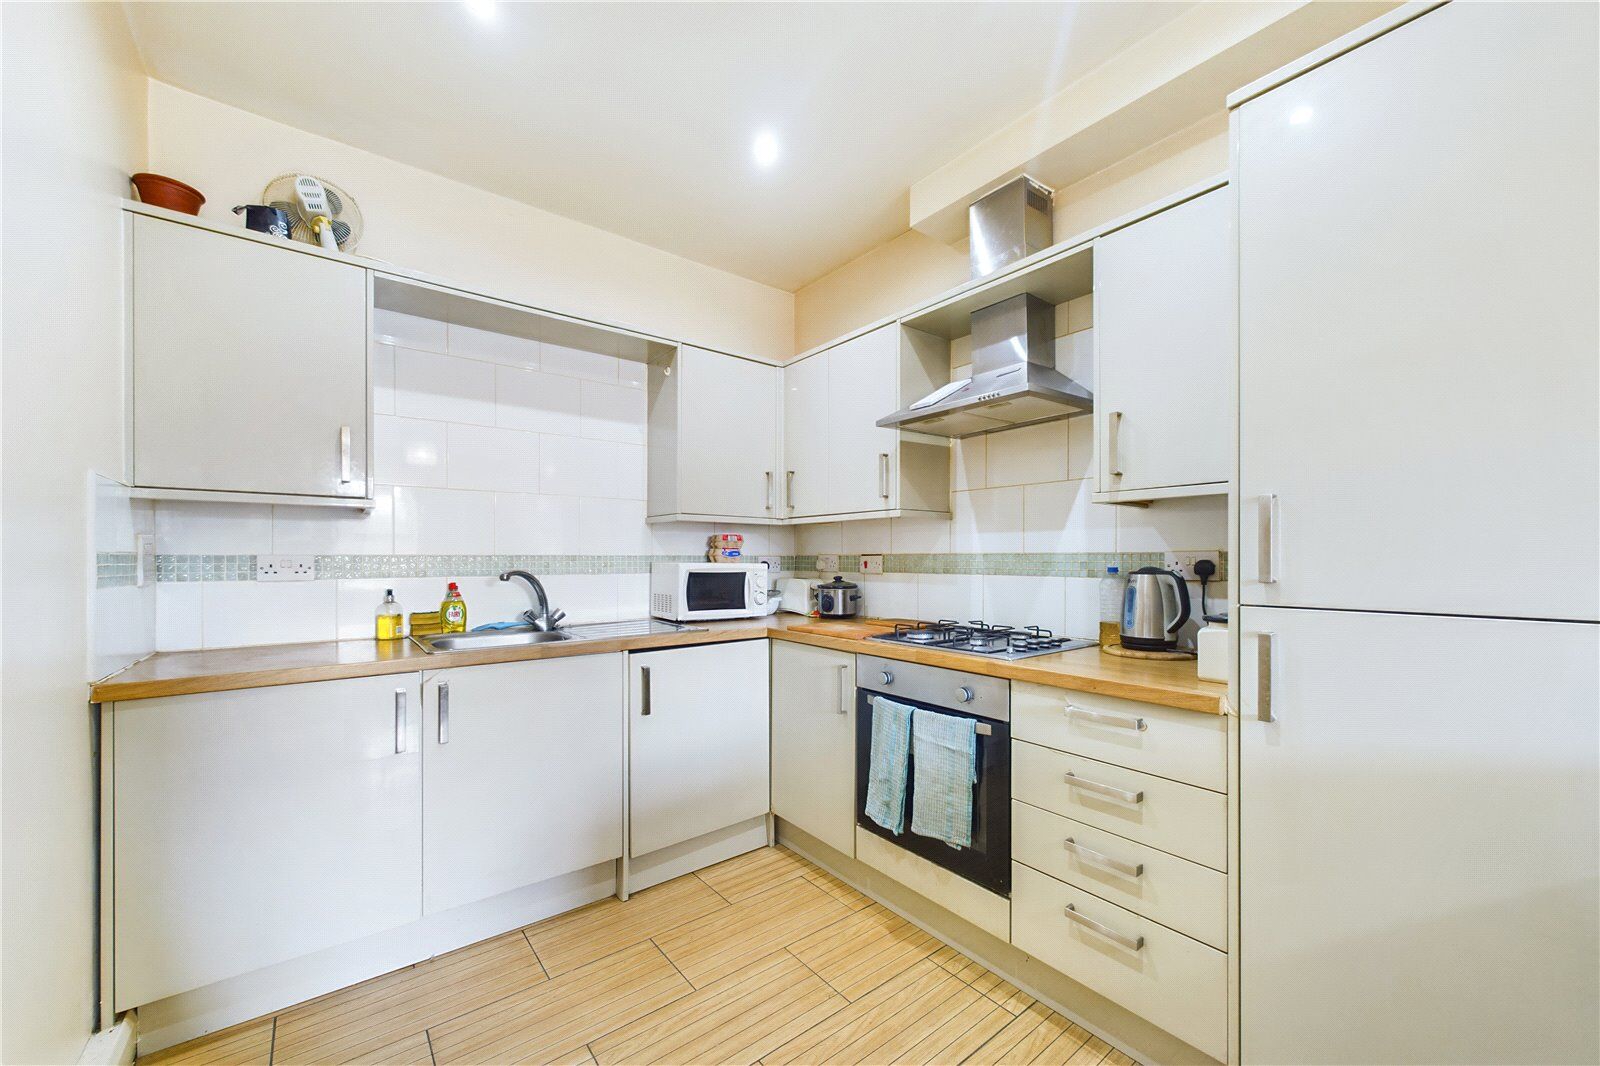 1 bedroom  flat for sale Angel Pavement, Royston, SG8, main image